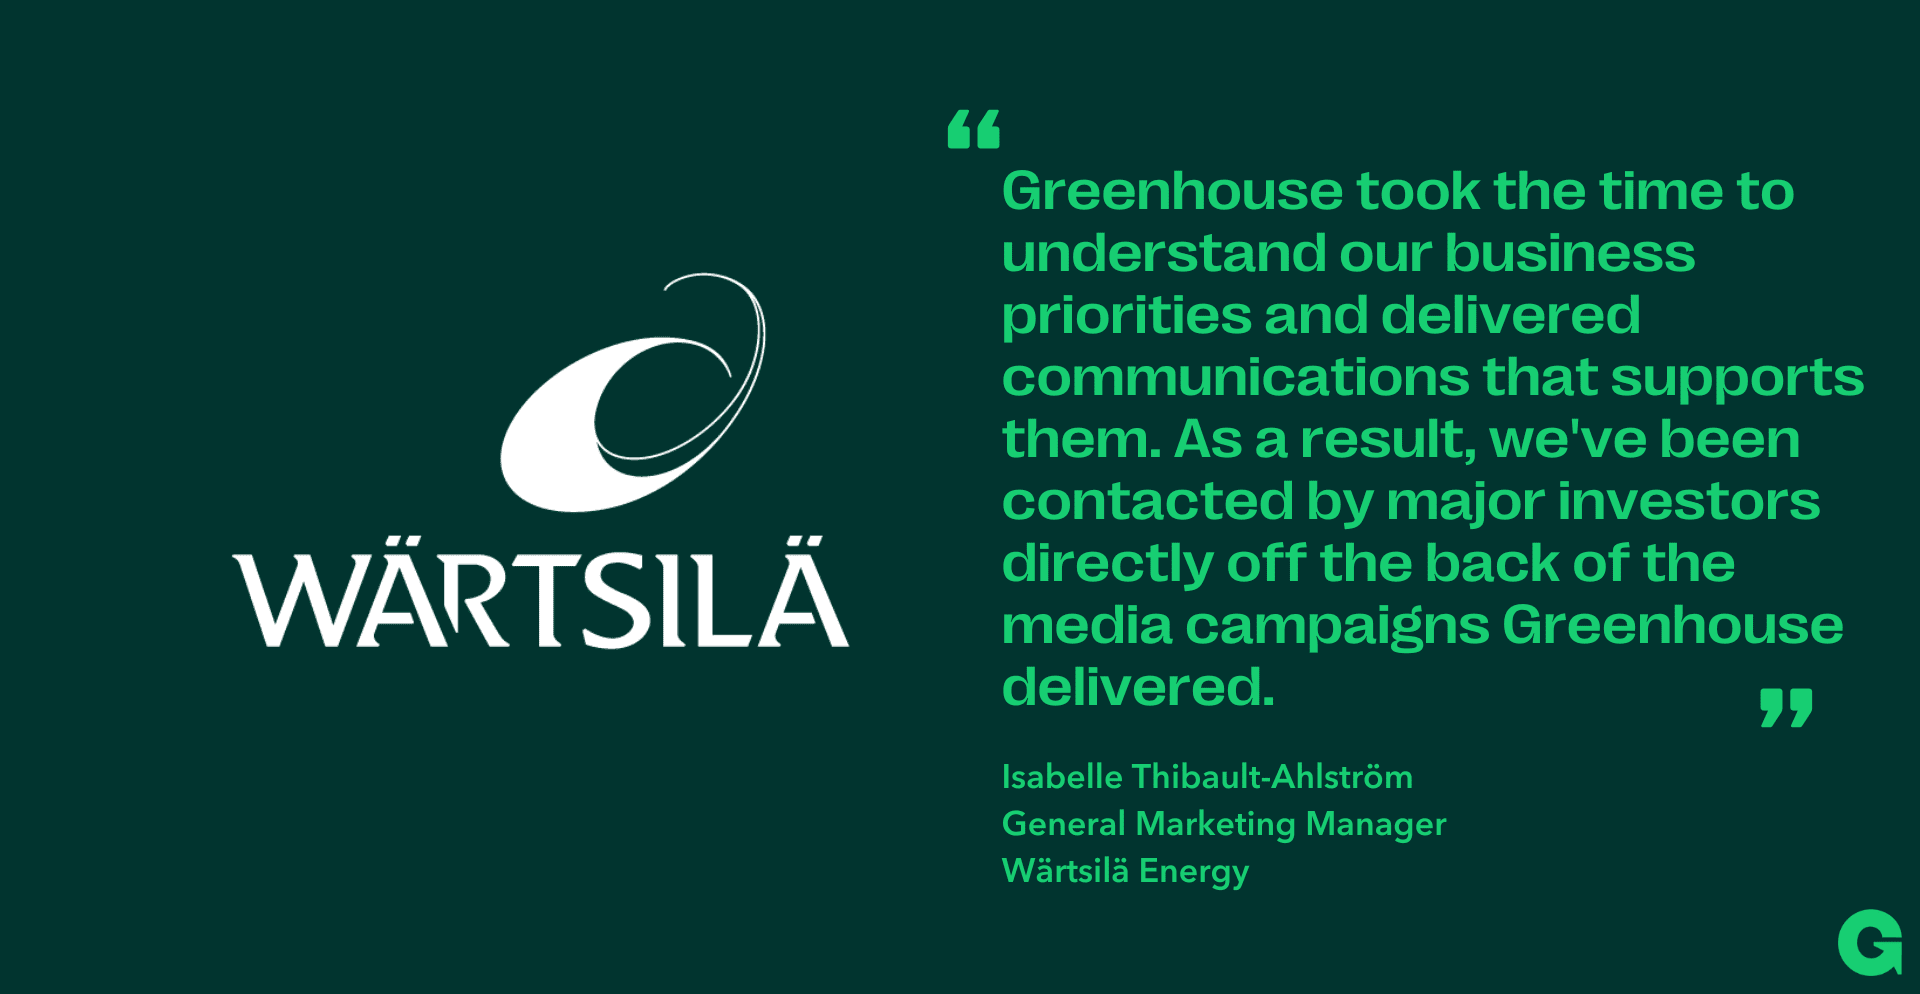 Quote by Isabelle Thibault-Ahlstrom, General Marketing Manager at Warstila Energy